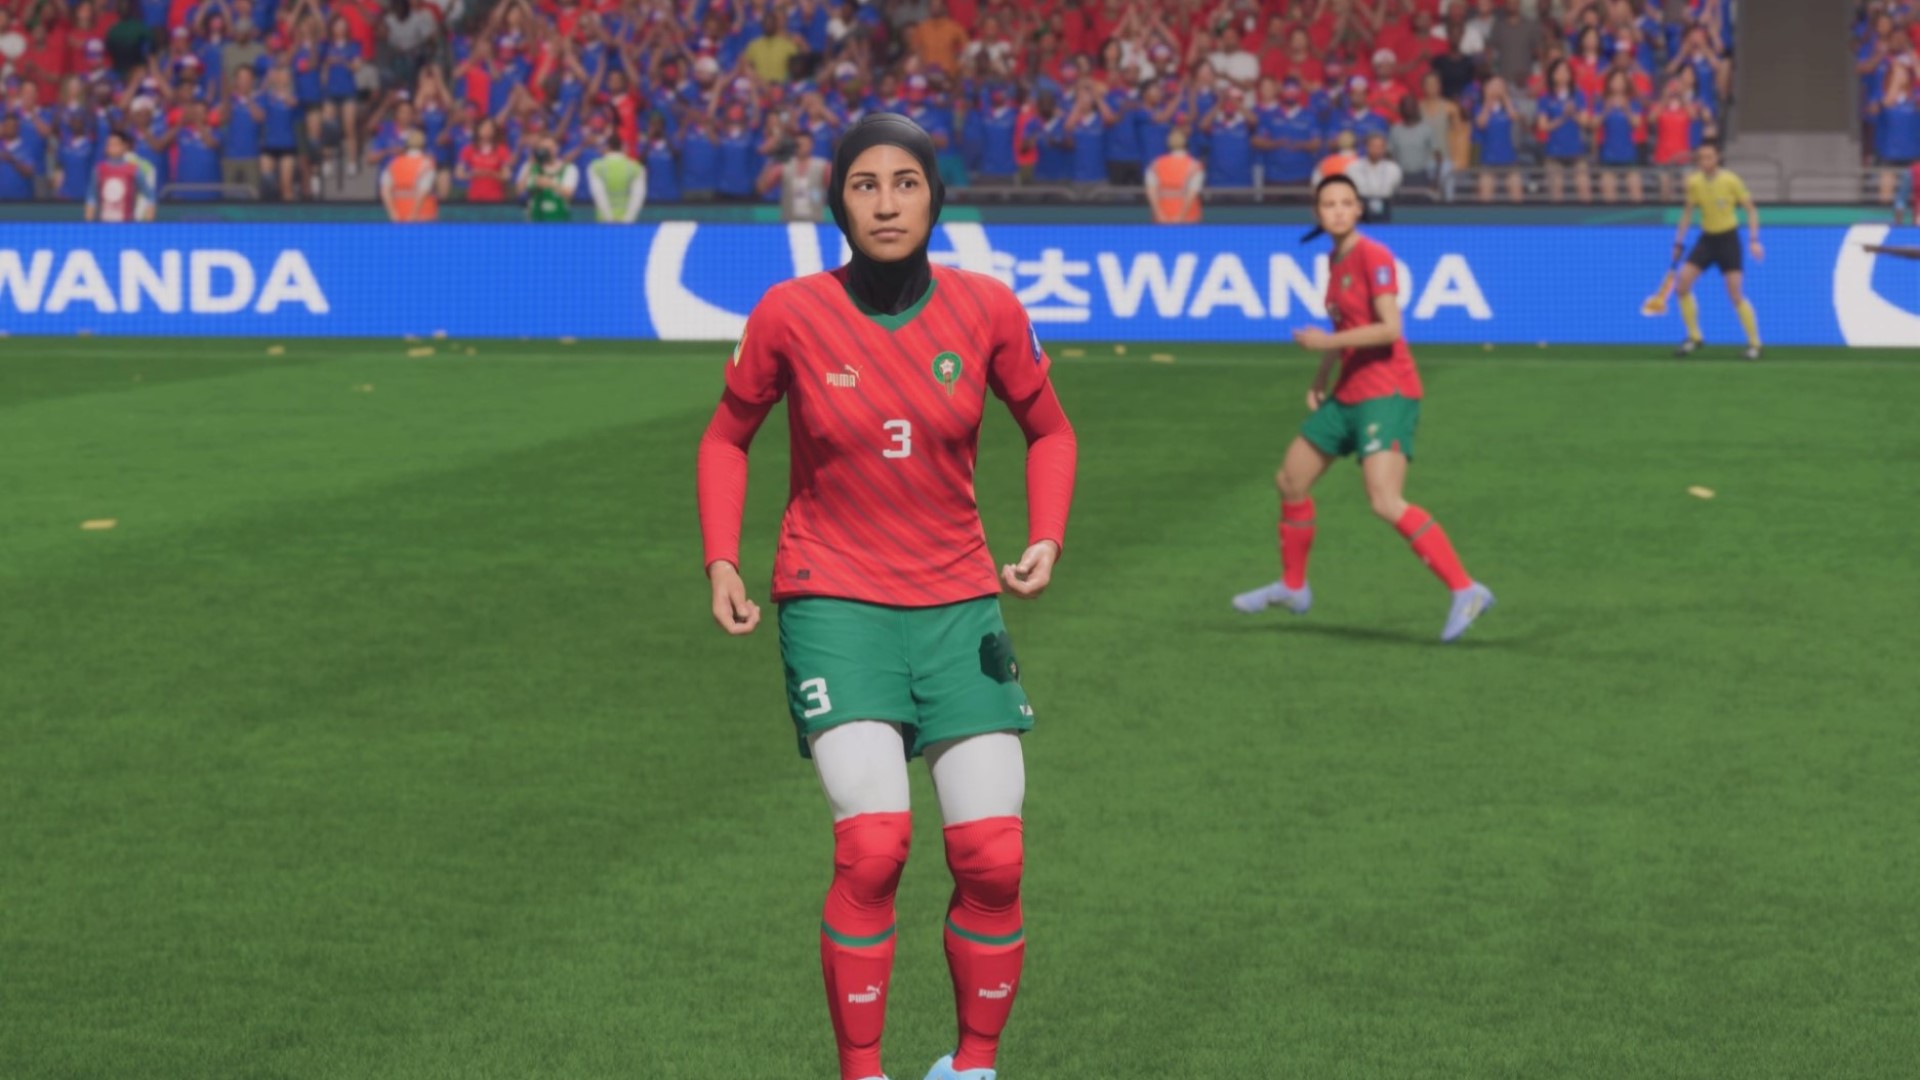 FIFA 23 adds Hijab wearing player in franchise first TechRadar